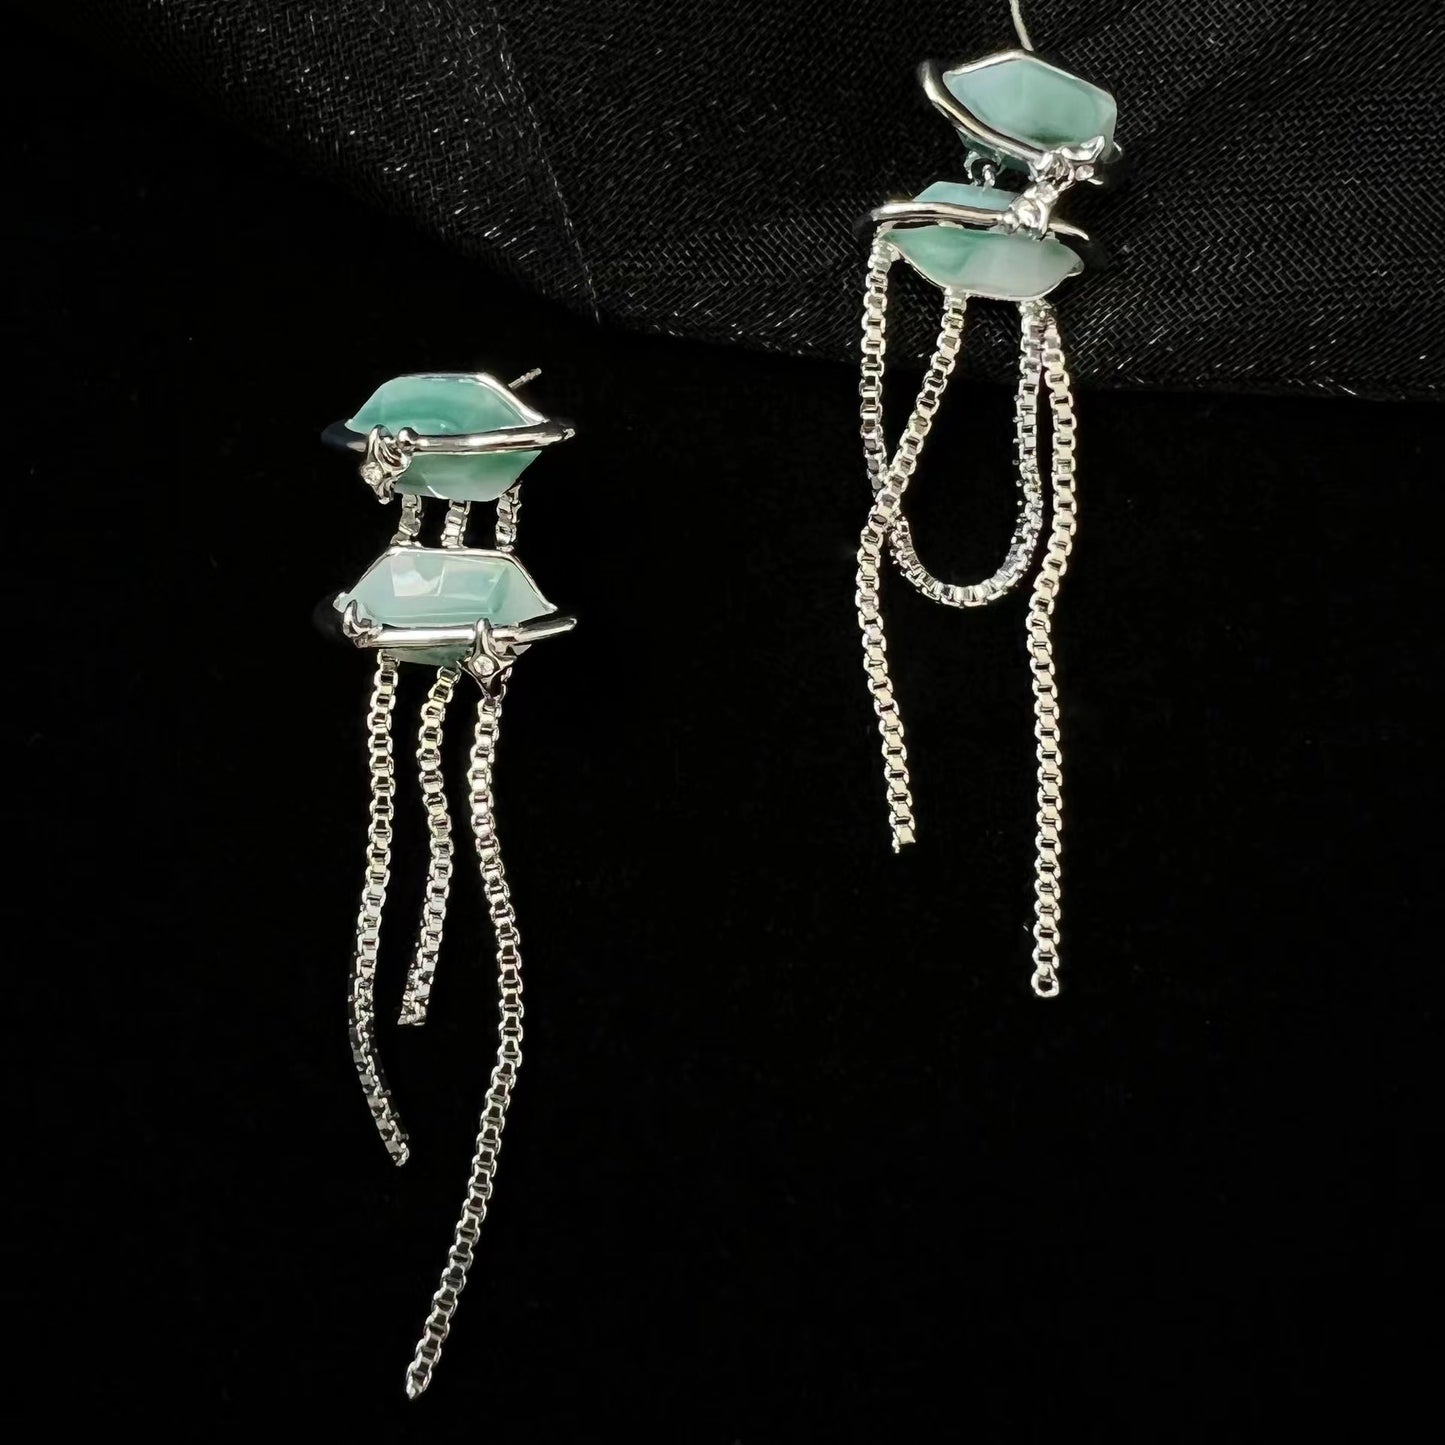 Chinese cloud fringe earrings are designed with a high-level sense of the minority